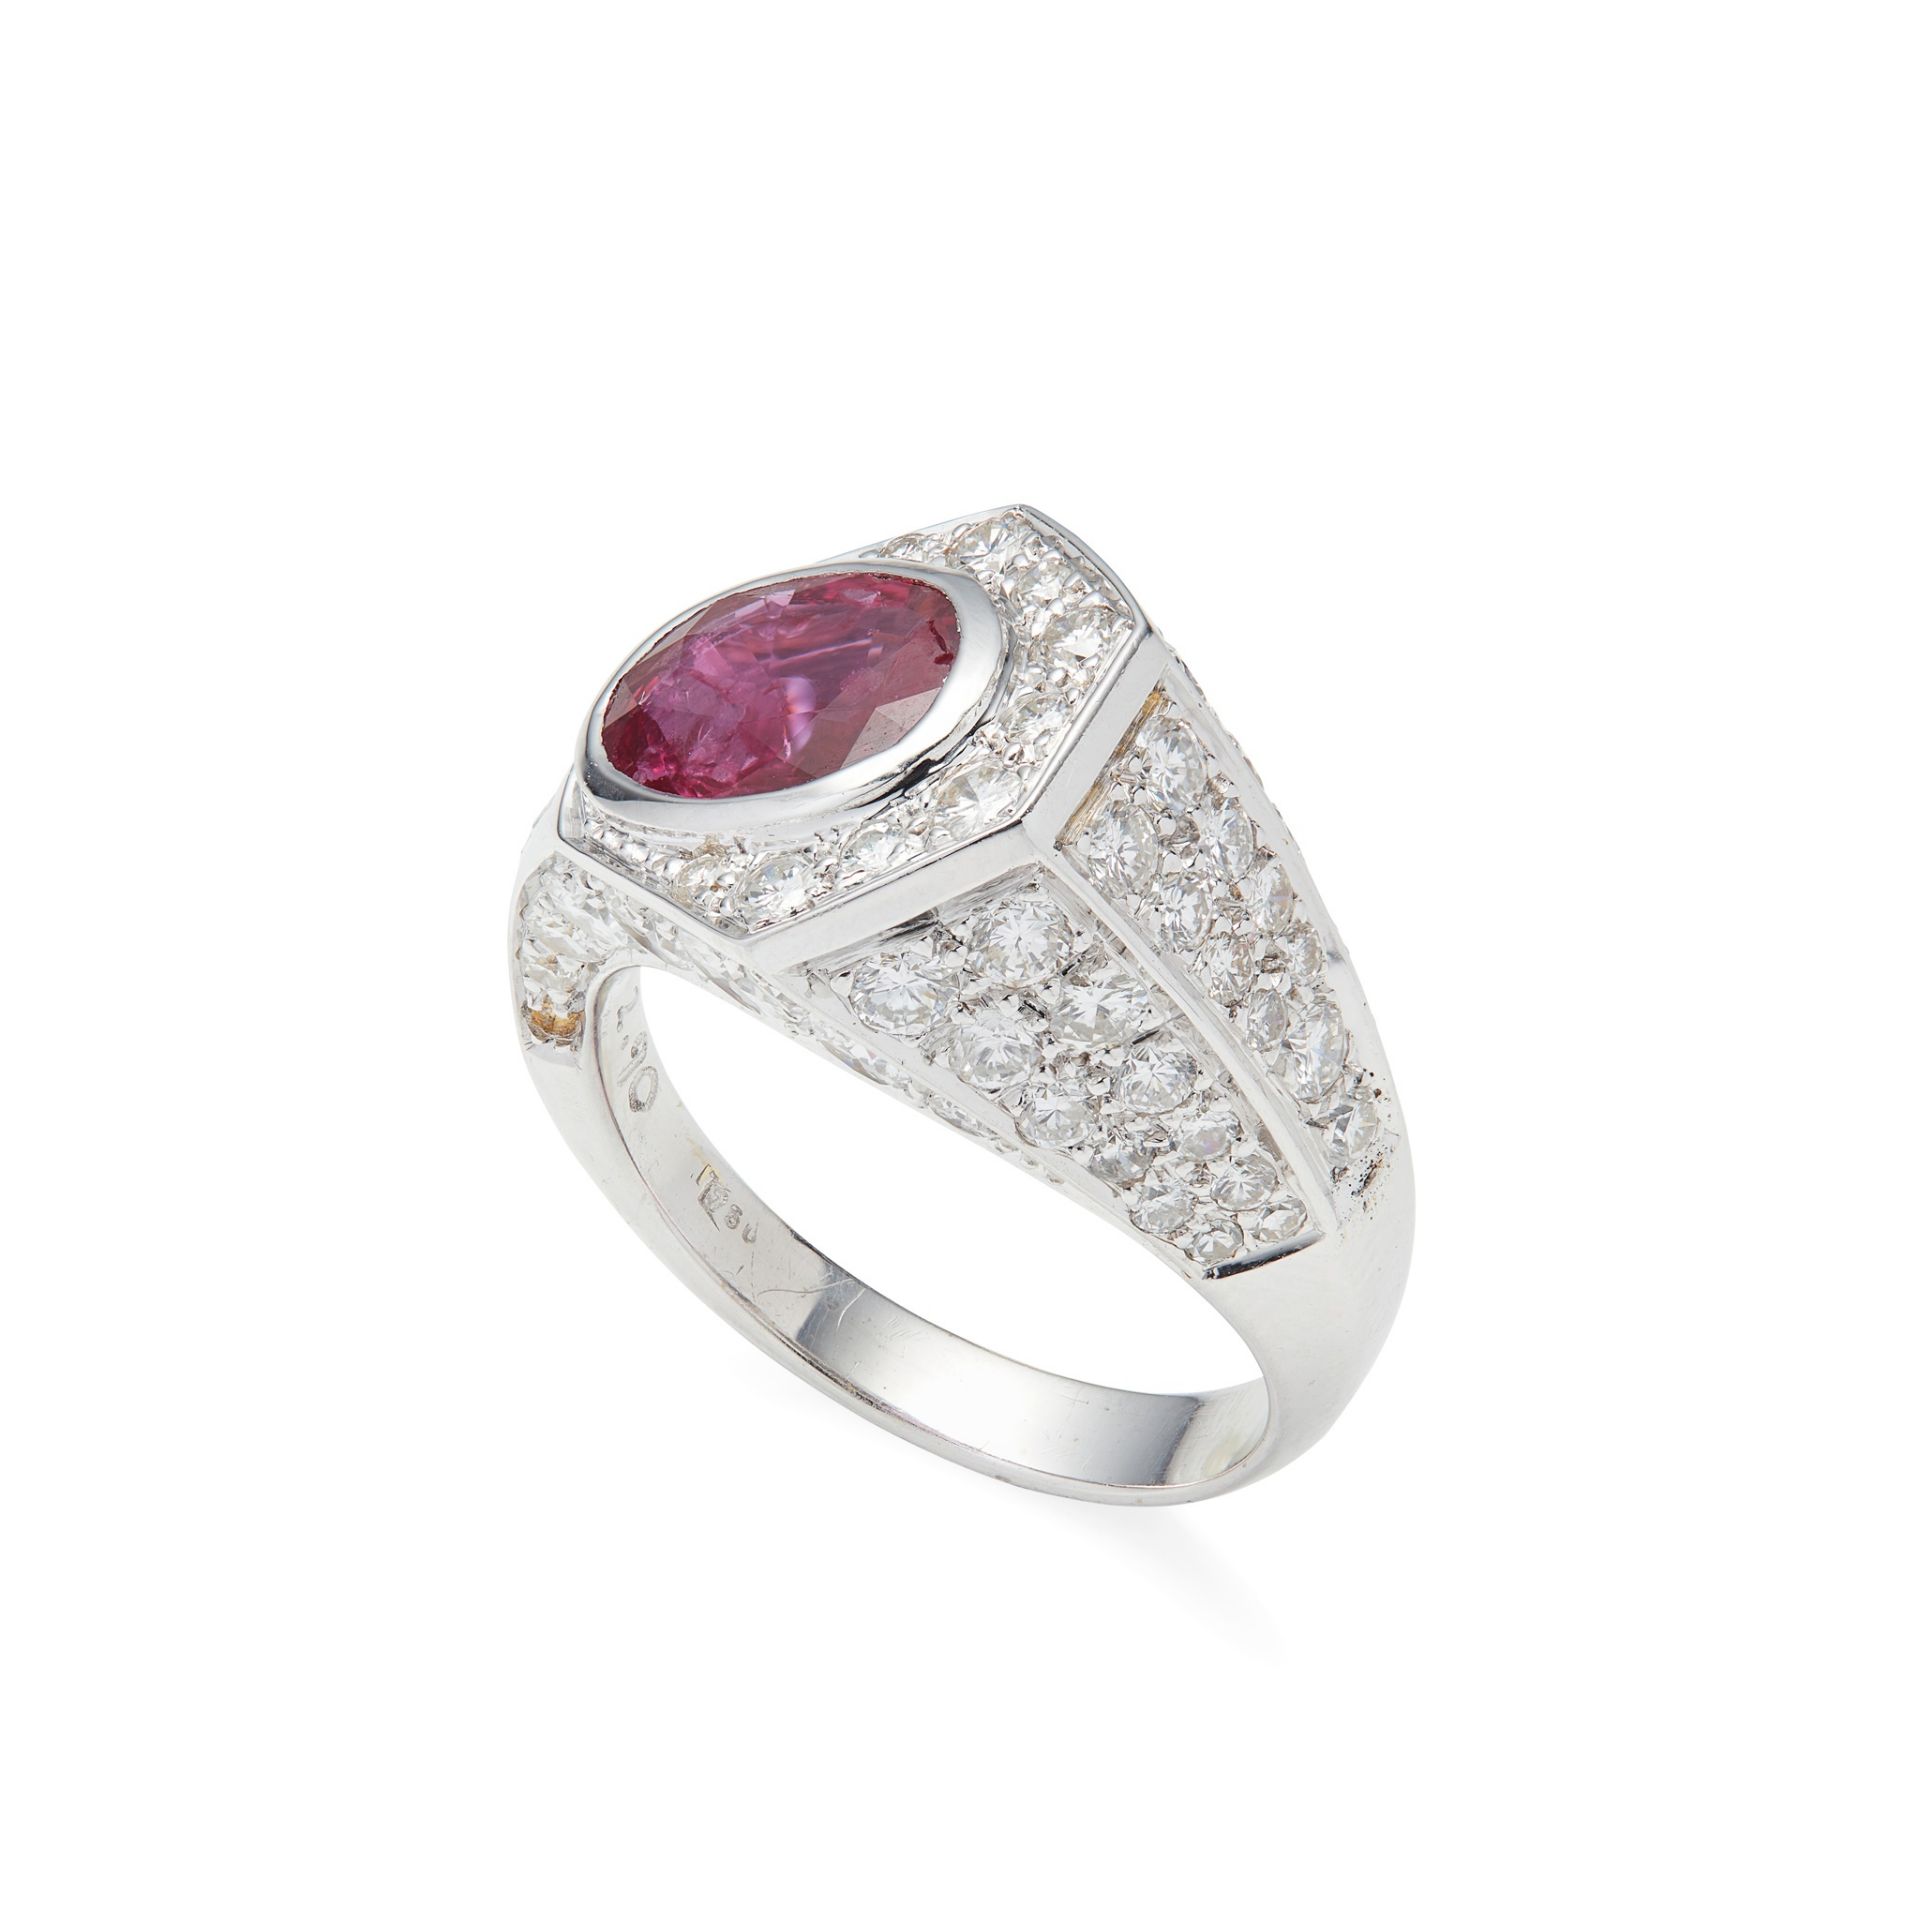 A ruby and diamond set cocktail ring - Image 2 of 2